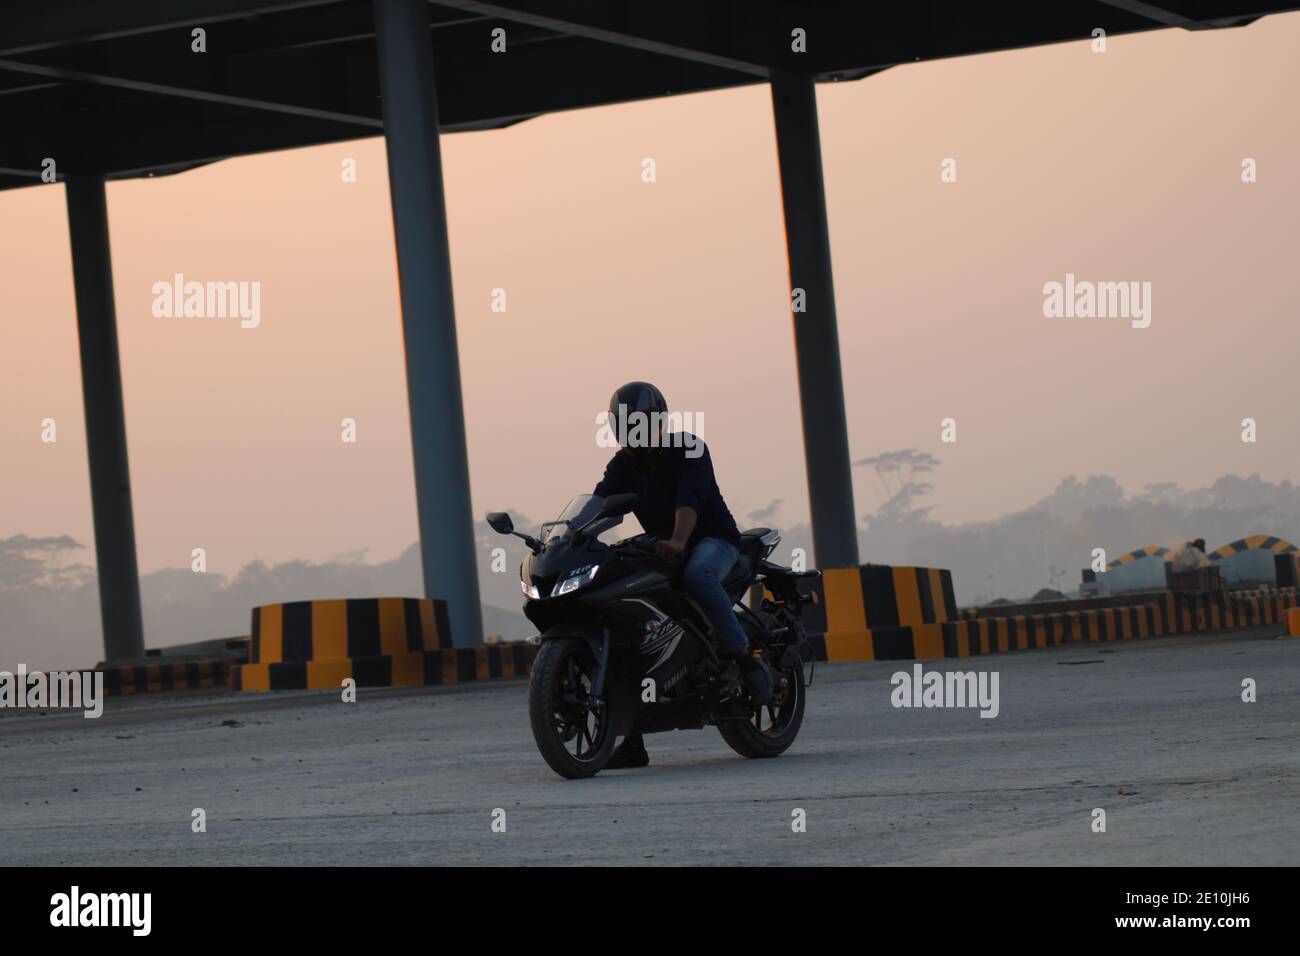 R15 version 3 sports bike with excellent background photo capture. Stock Photo